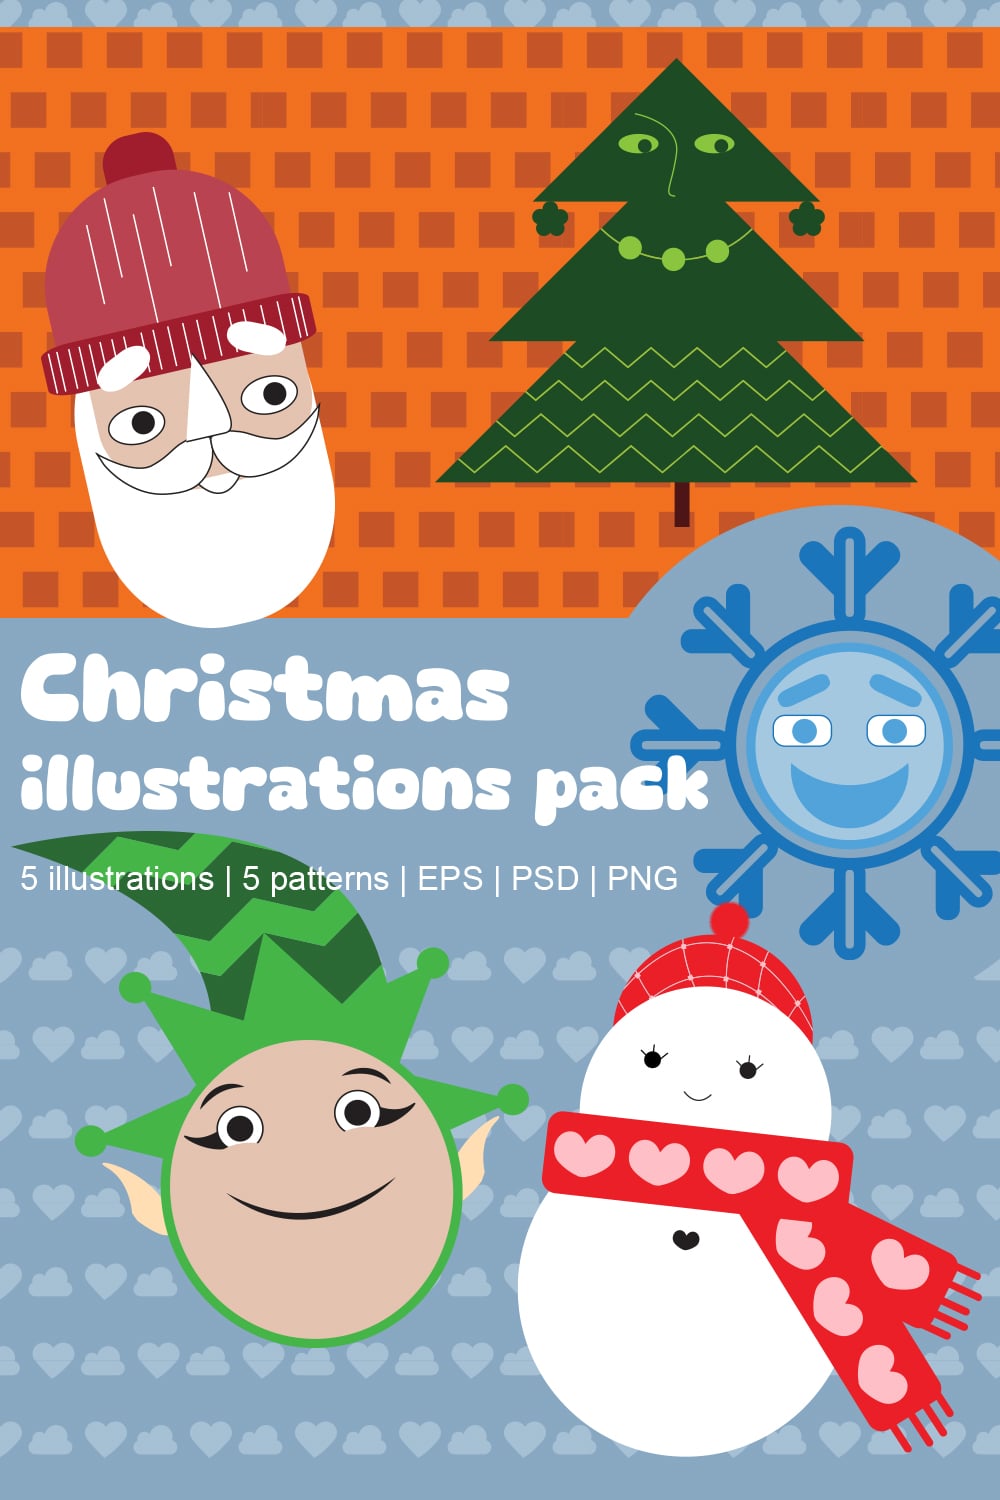 Cute modern style December Christmas characters Santa Claus Christmas Tree Elf, Snowflake, Snowman, colored background patterns Holiday Illustration clip art bundle, Cartoon Illustration pinterest preview image.